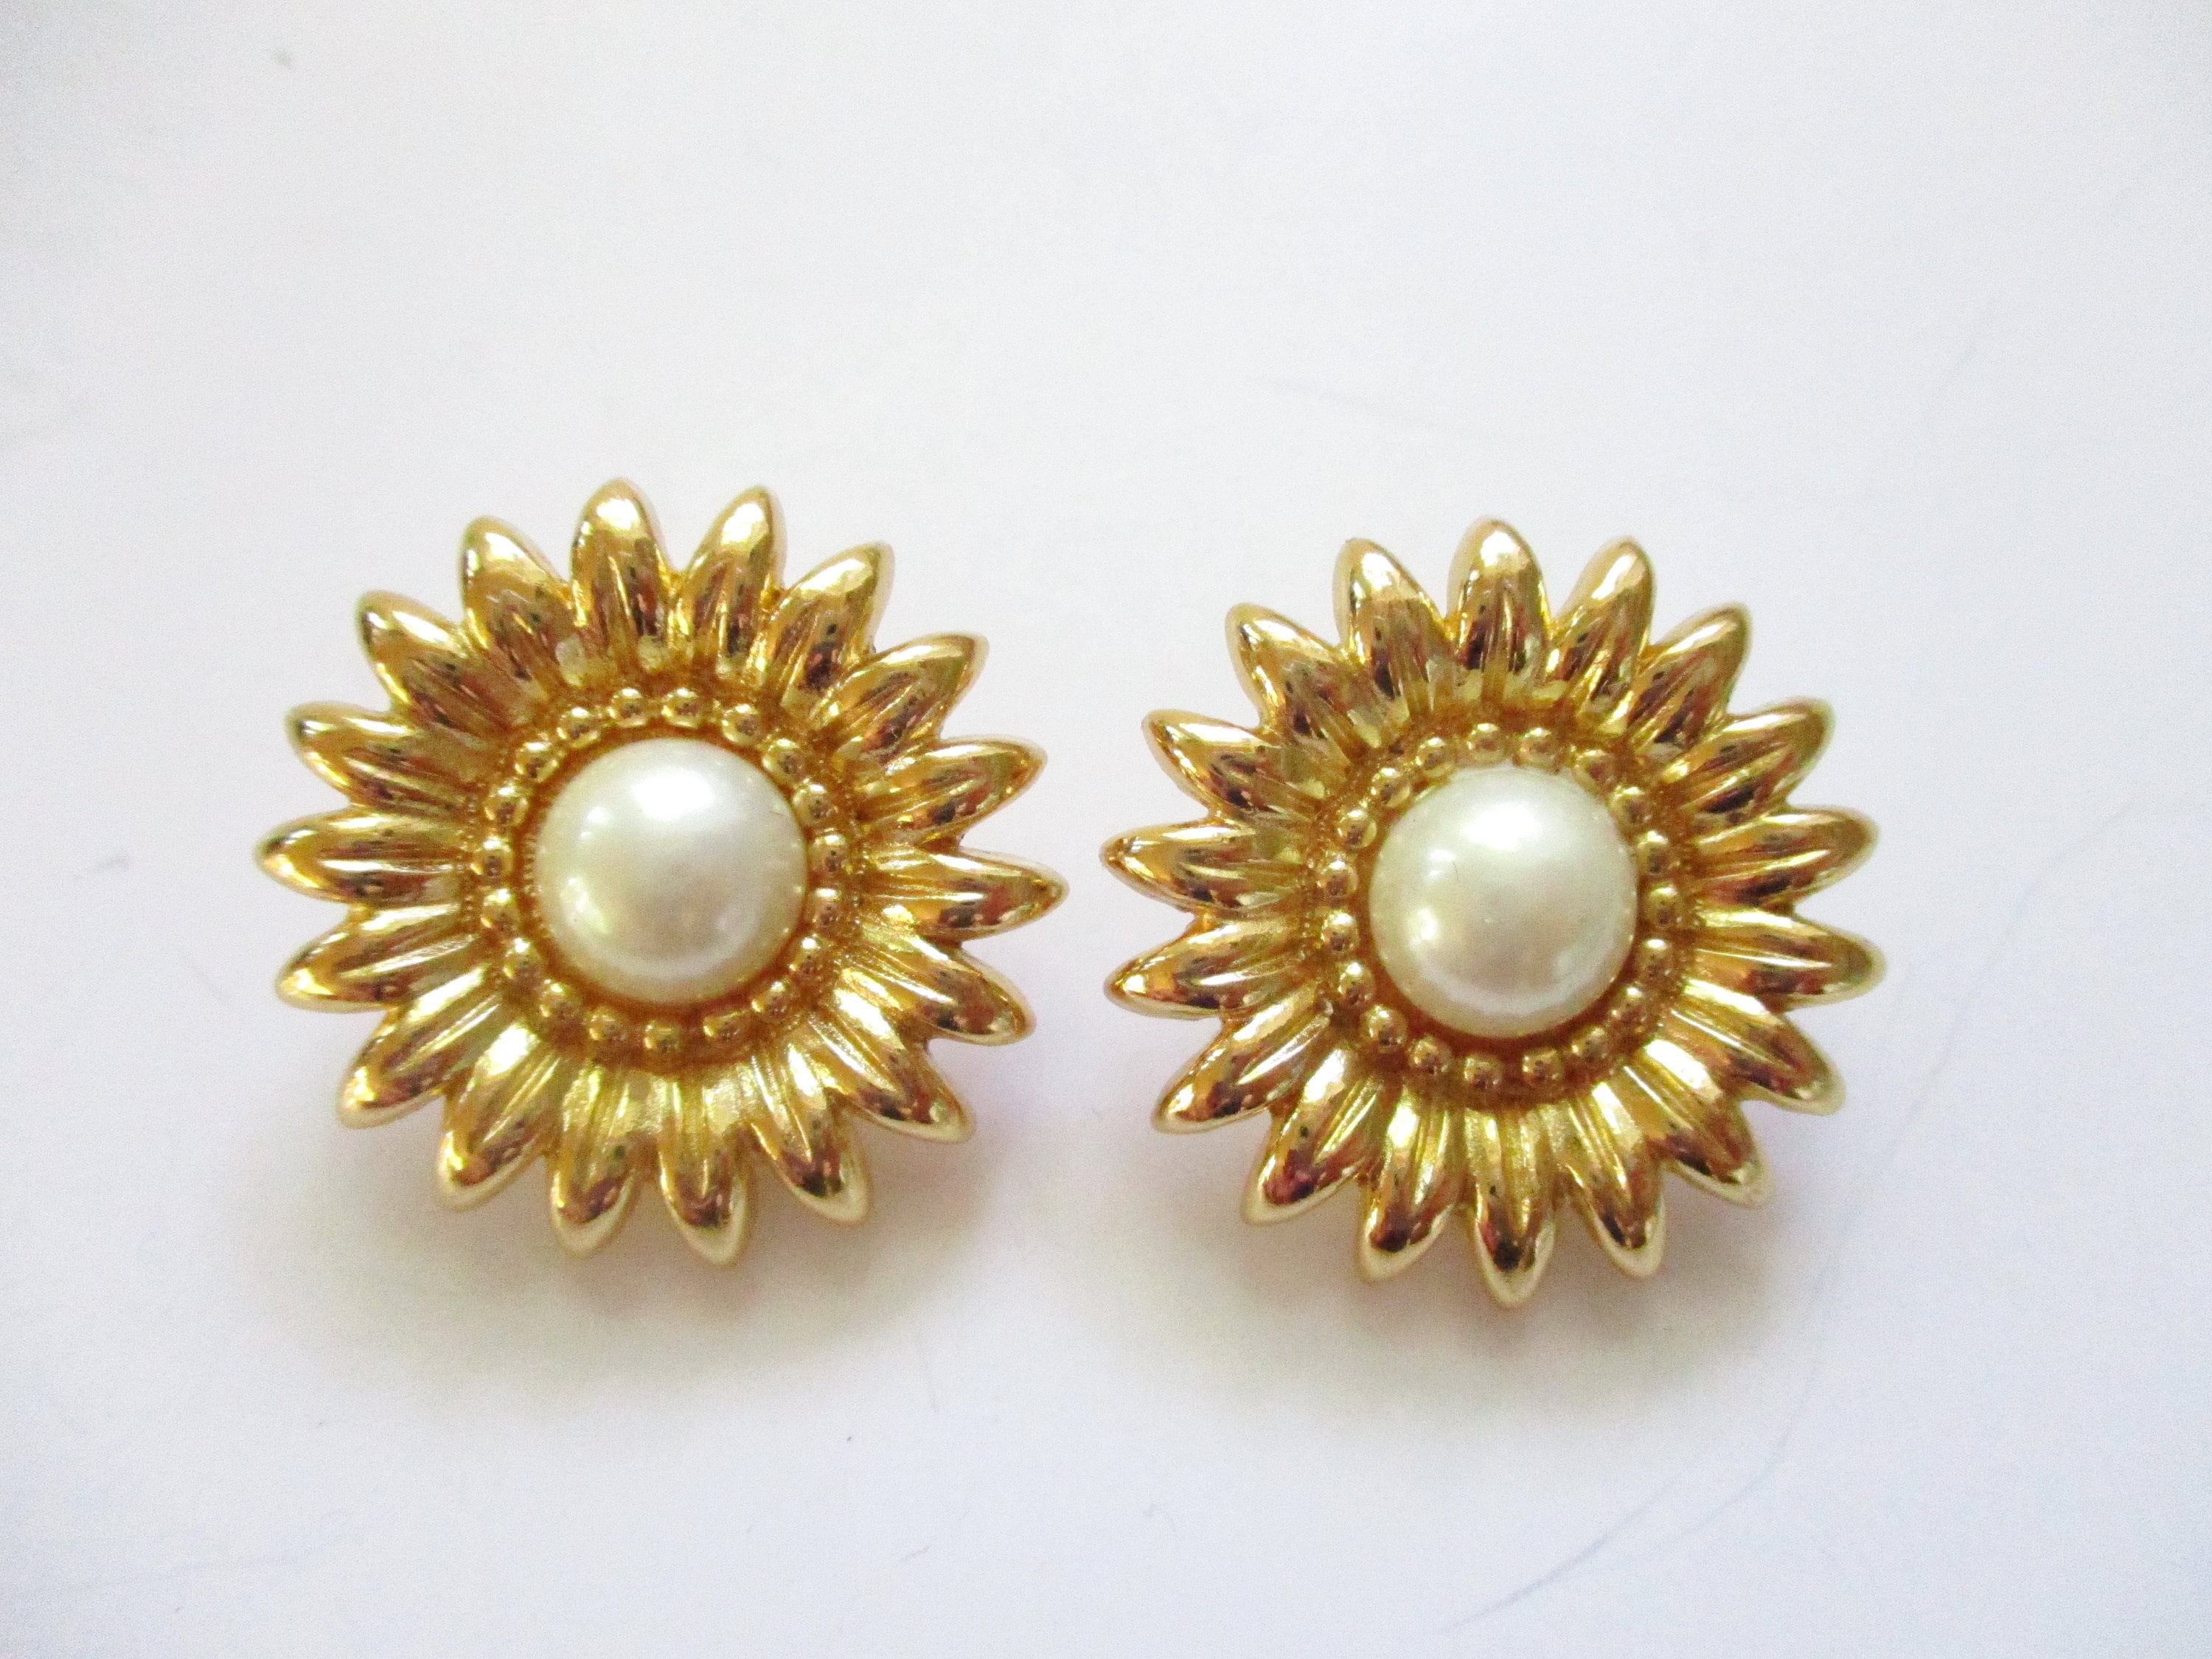 Louisette Stud Earrings with Enamel and Faux Pearls Gold/Silver